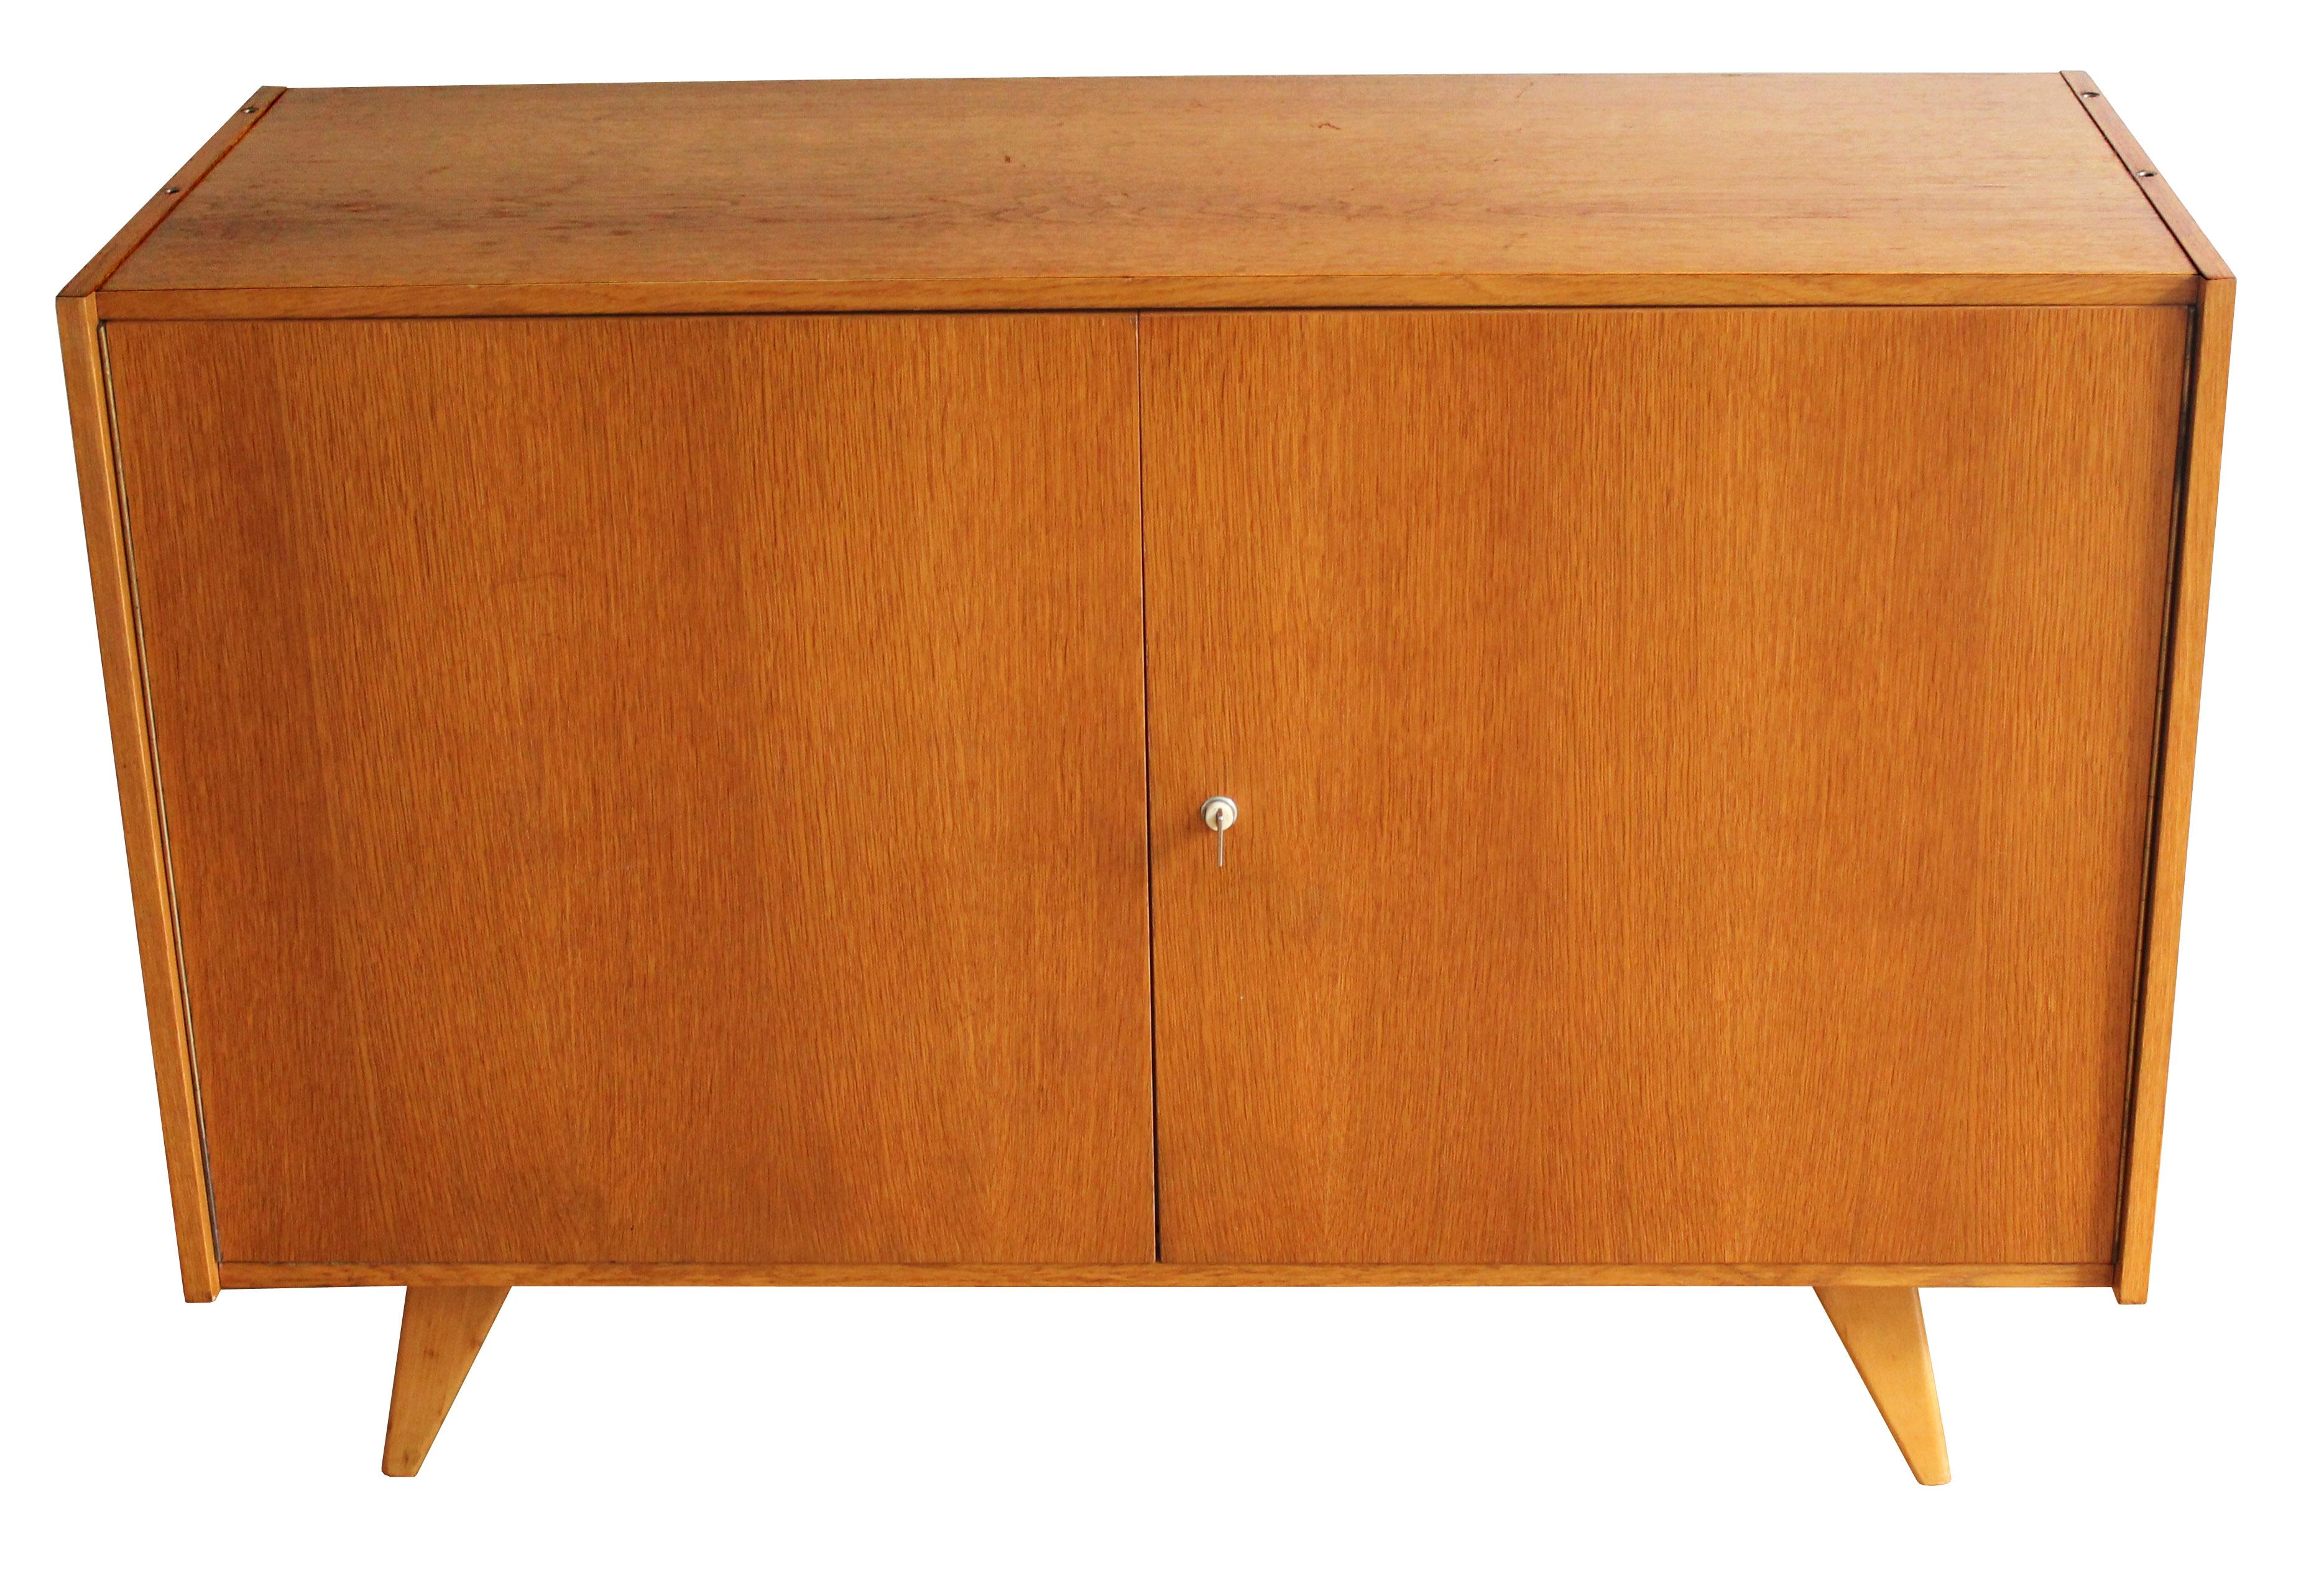 This U-450 oak sideboard was designed by legendary Czech furniture designer Jiri Jiroutek, and was part of the popular U collection manufactured by Interier Praha in the 1960s Czechoslovakia.

This piece perfectly embodies the elegance of the